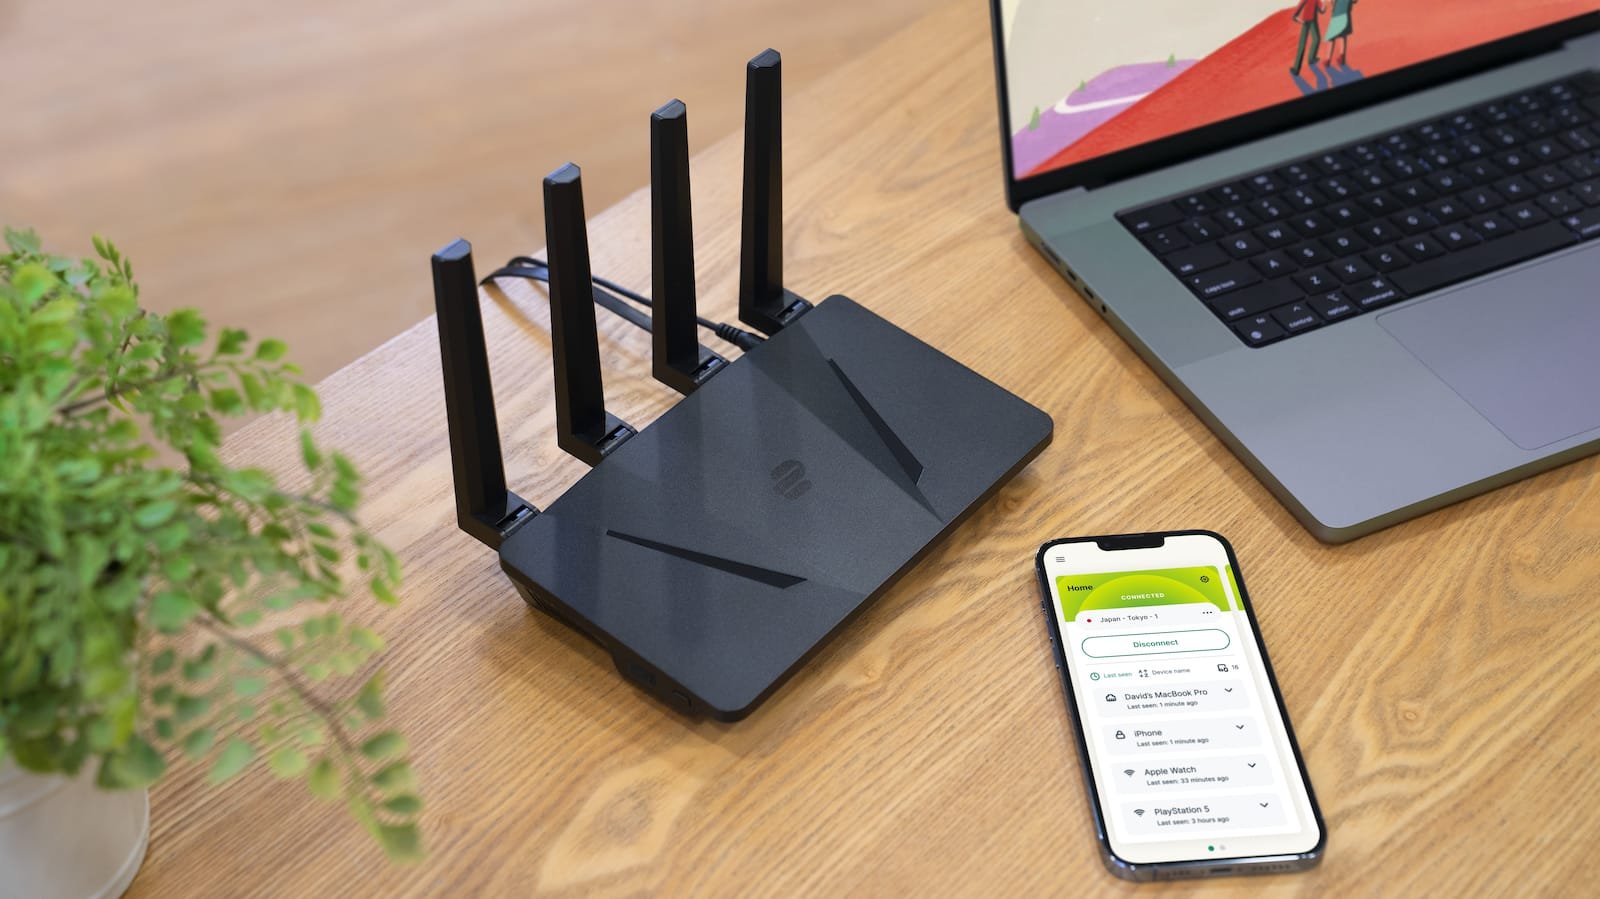 ExpressVPN Aircove Wi-Fi 6 VPN router has built-in VPN protection for your entire home